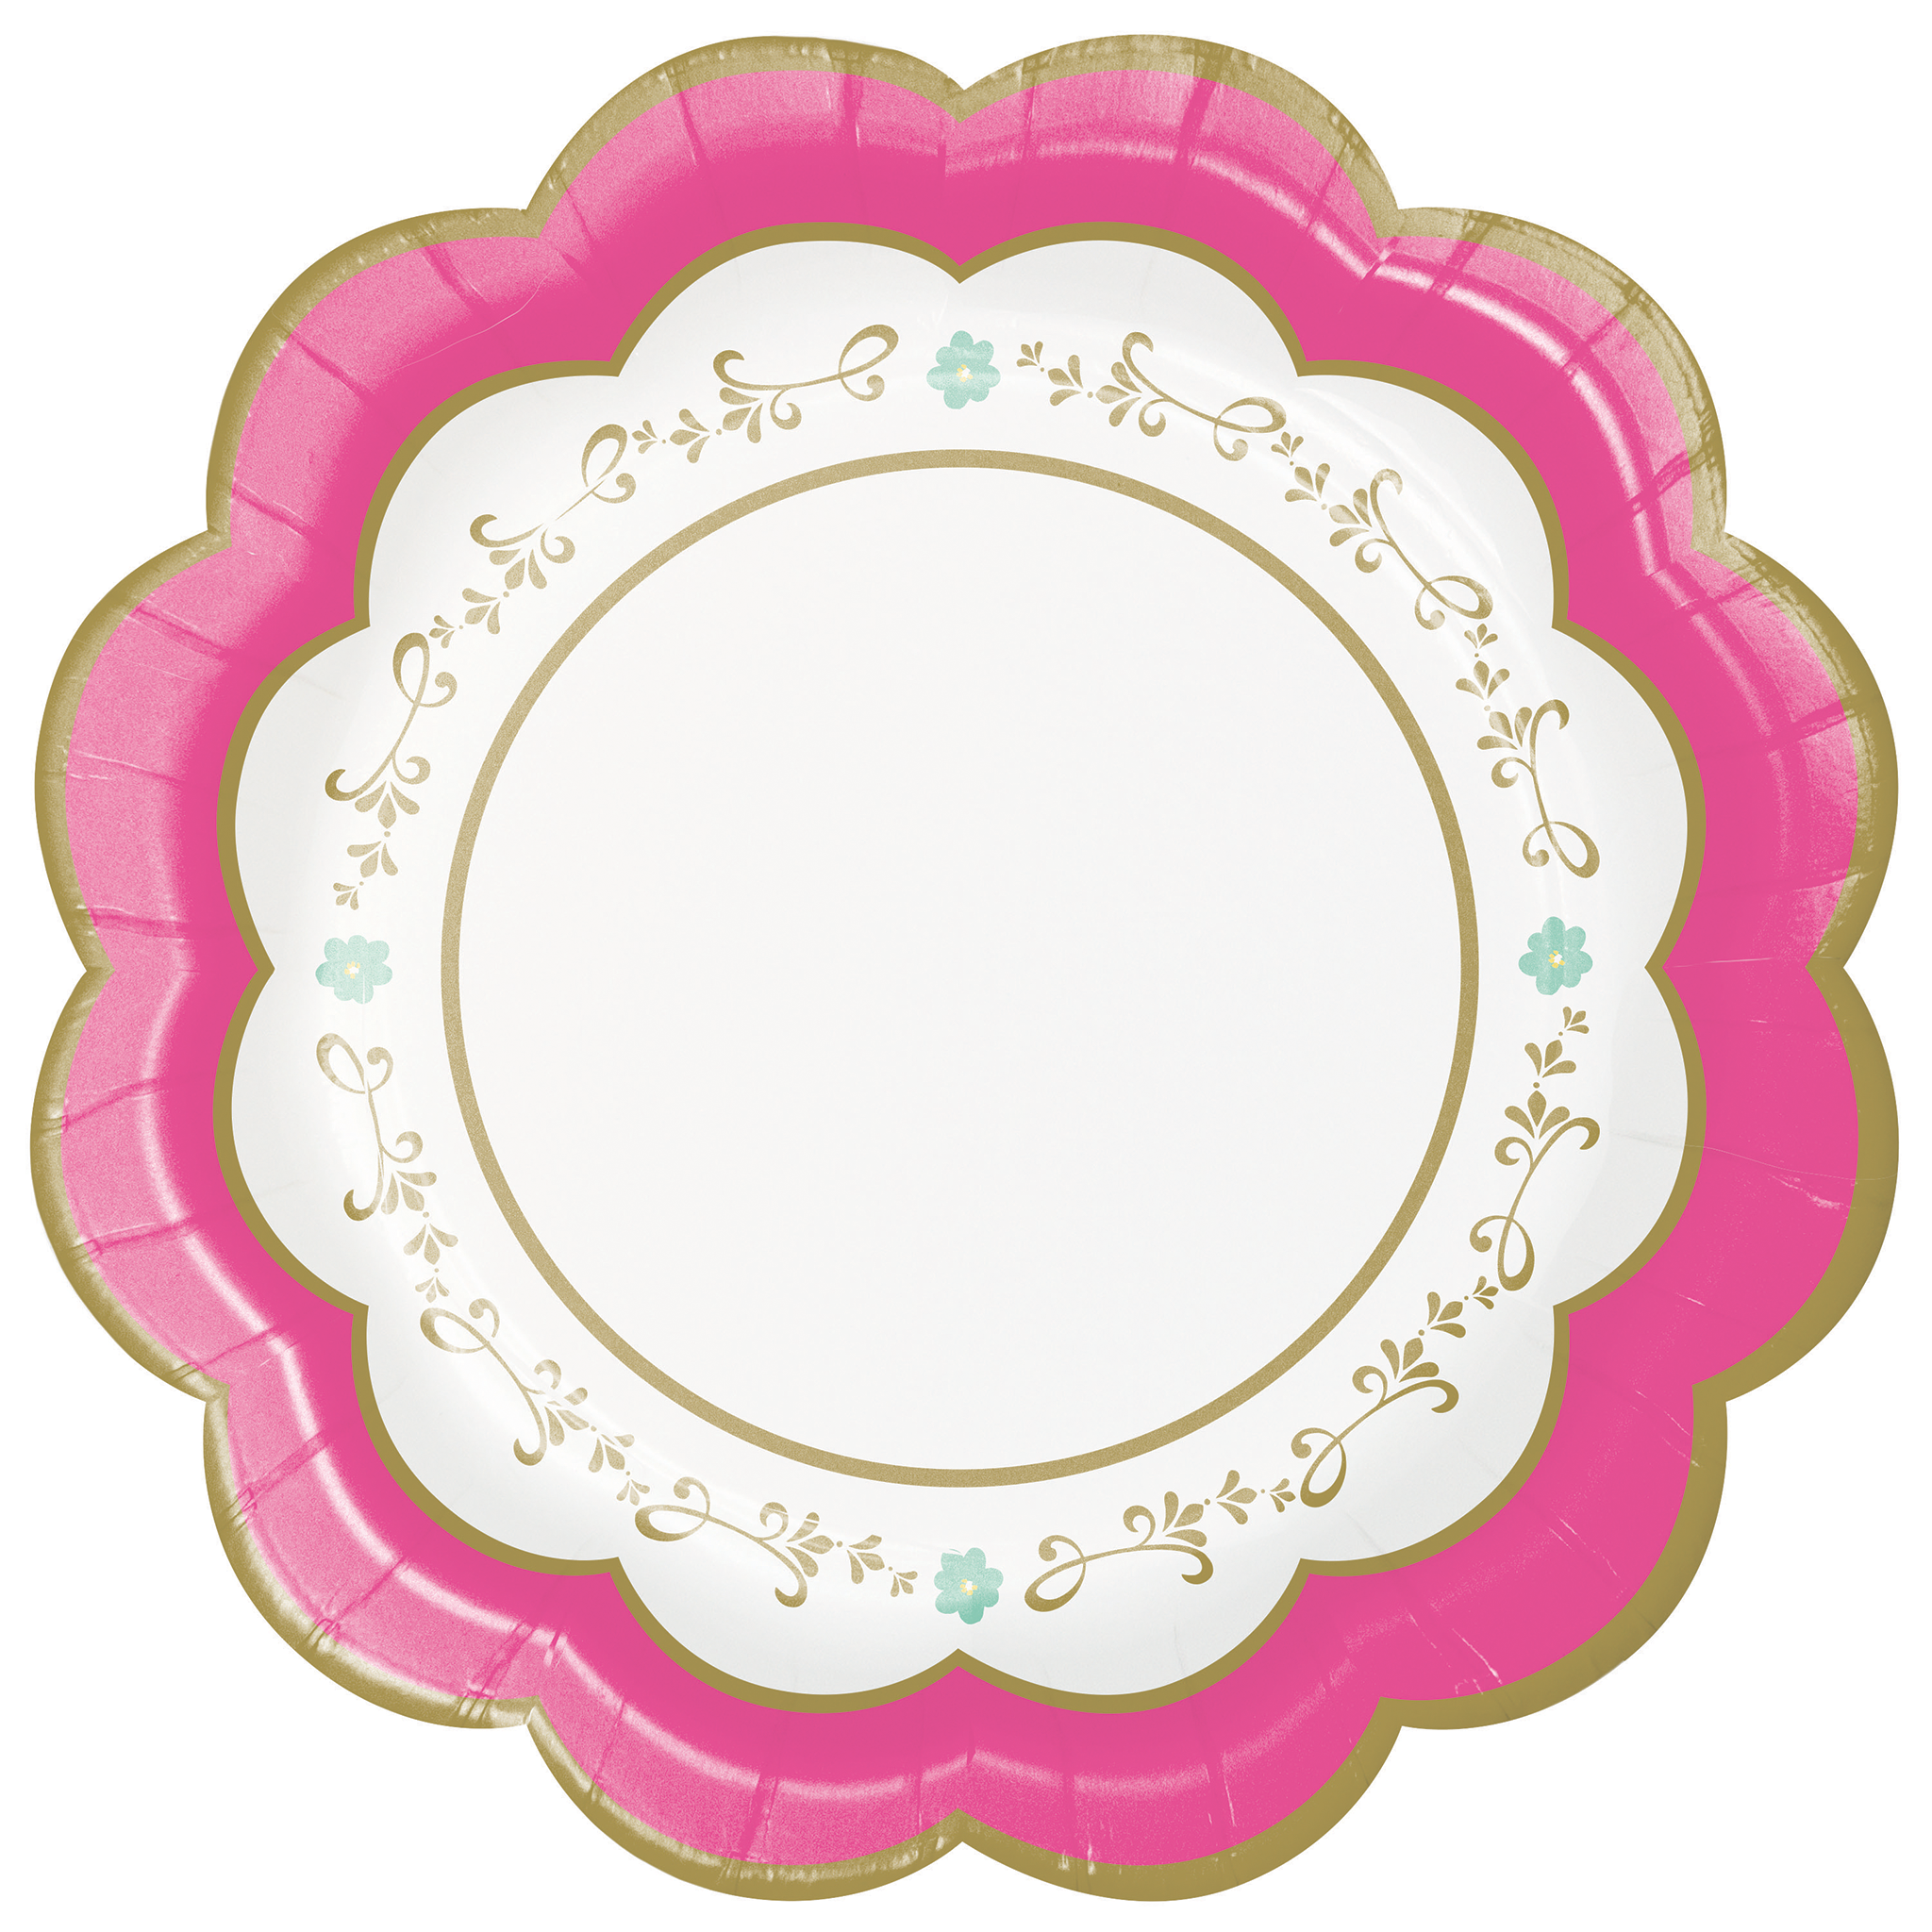 Floral Tea Party Scalloped Plate 7